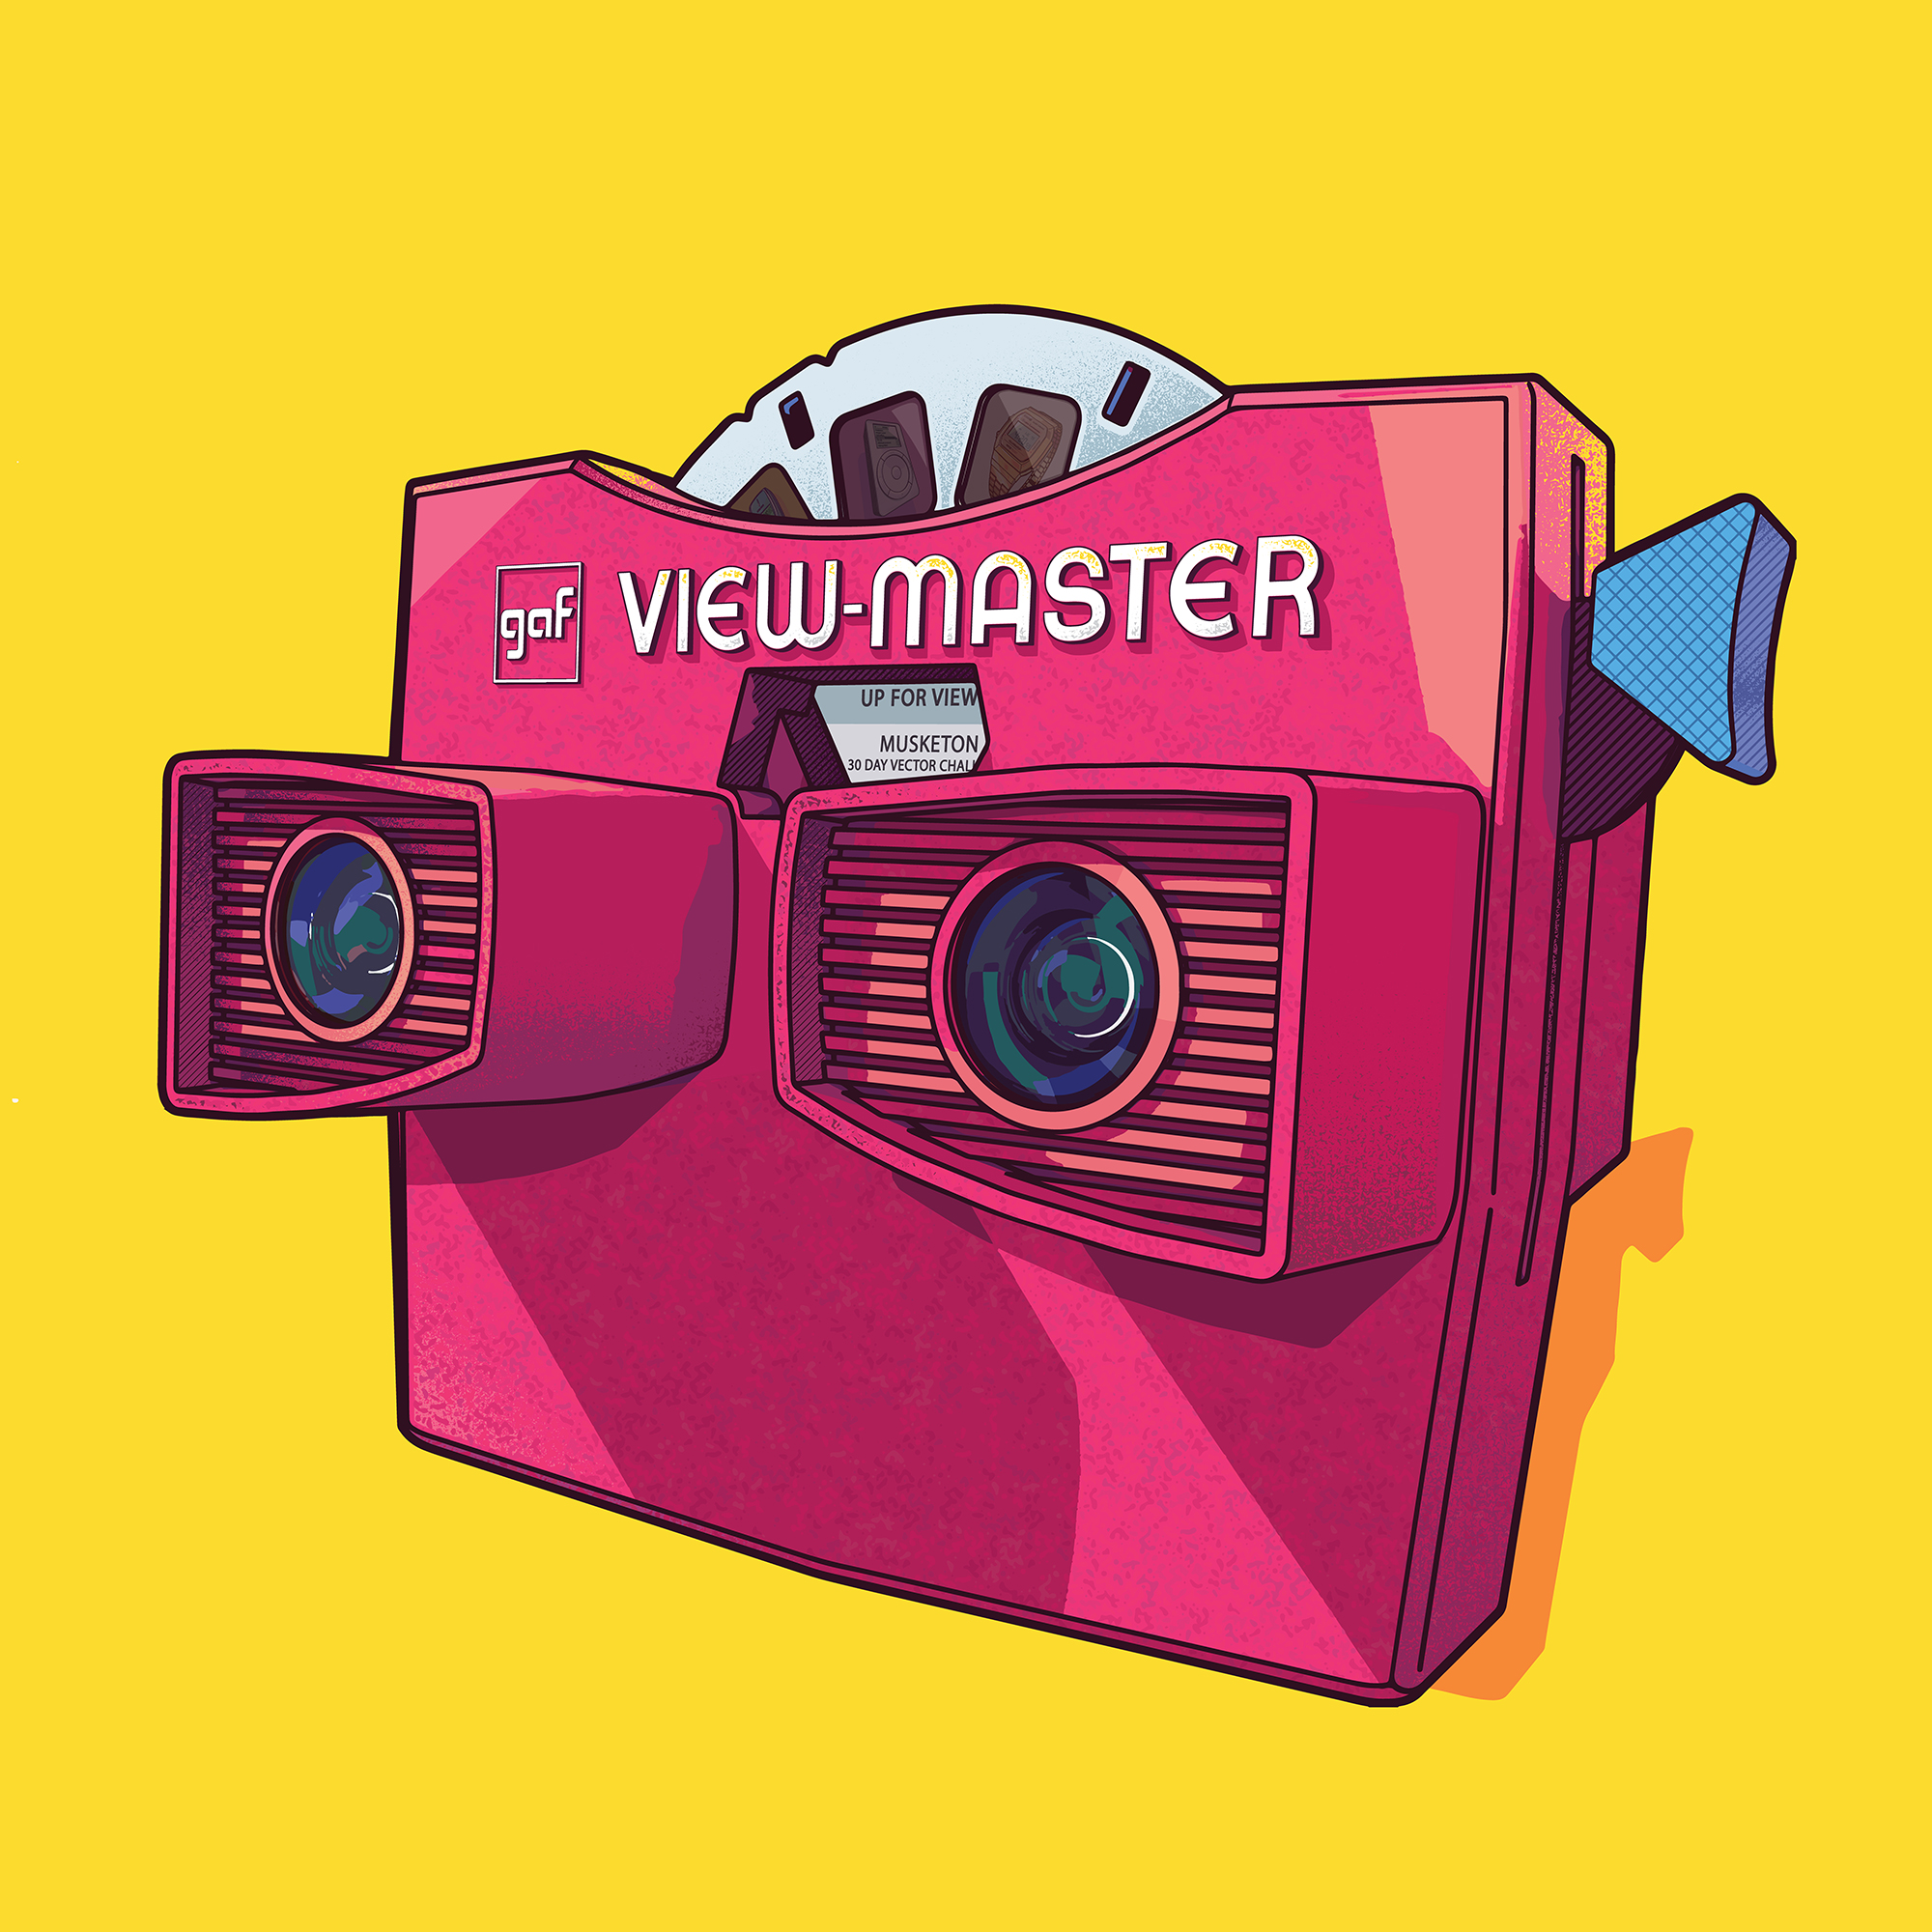 View-Master From The 90s By Bert Musketon